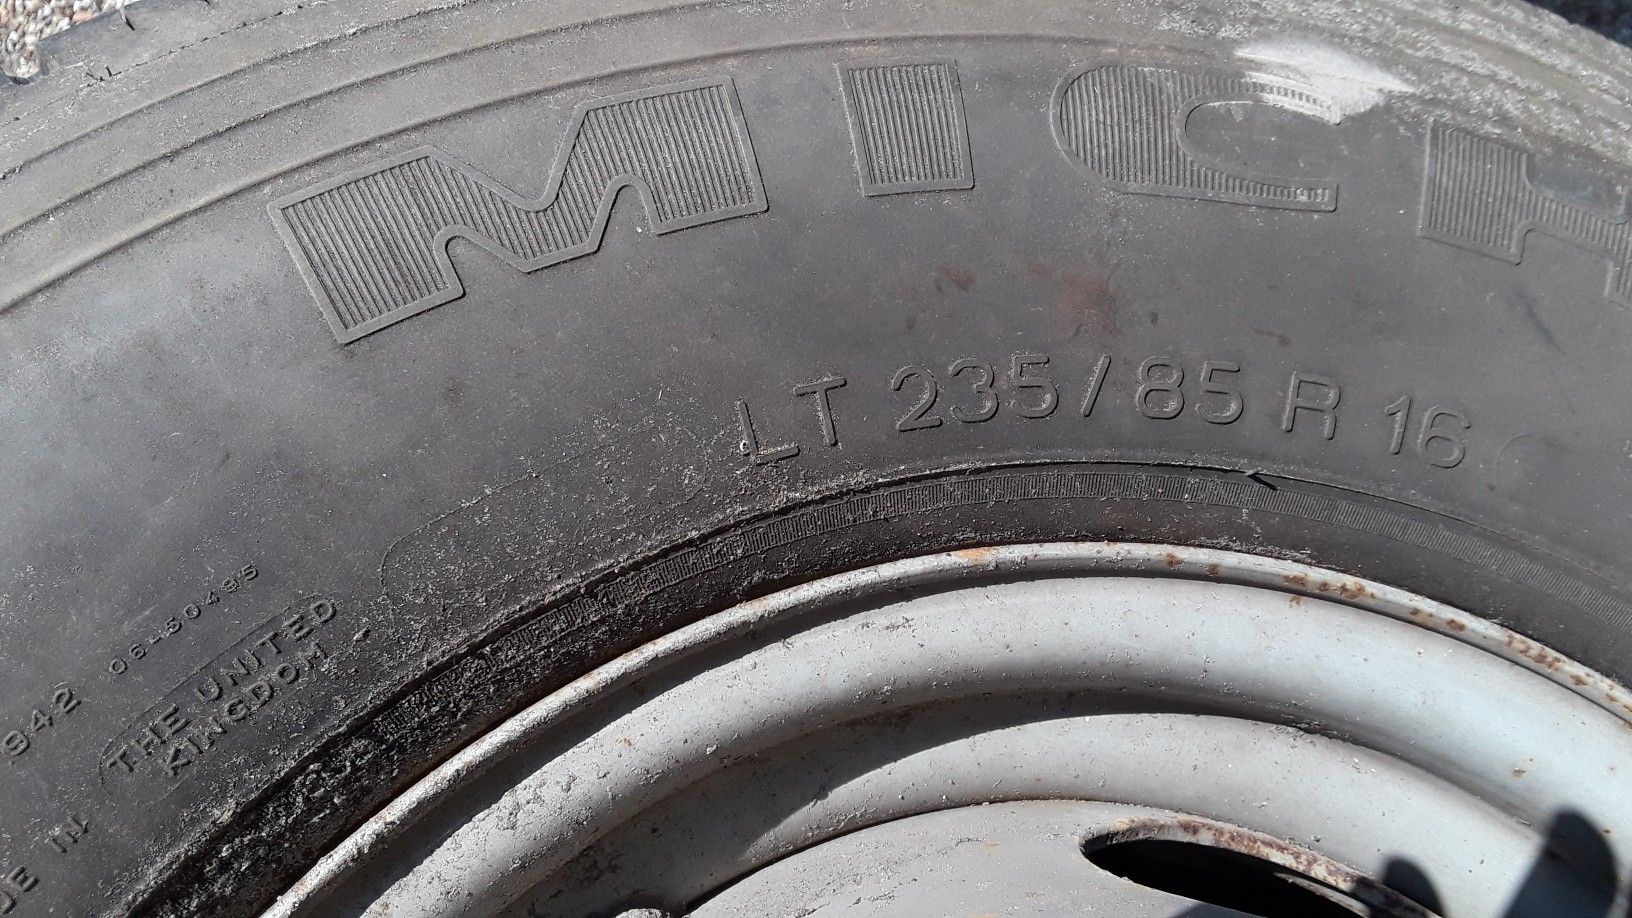 6 Tires and rims from 1994 pheonix cobra motorhome 150.00 a piece..